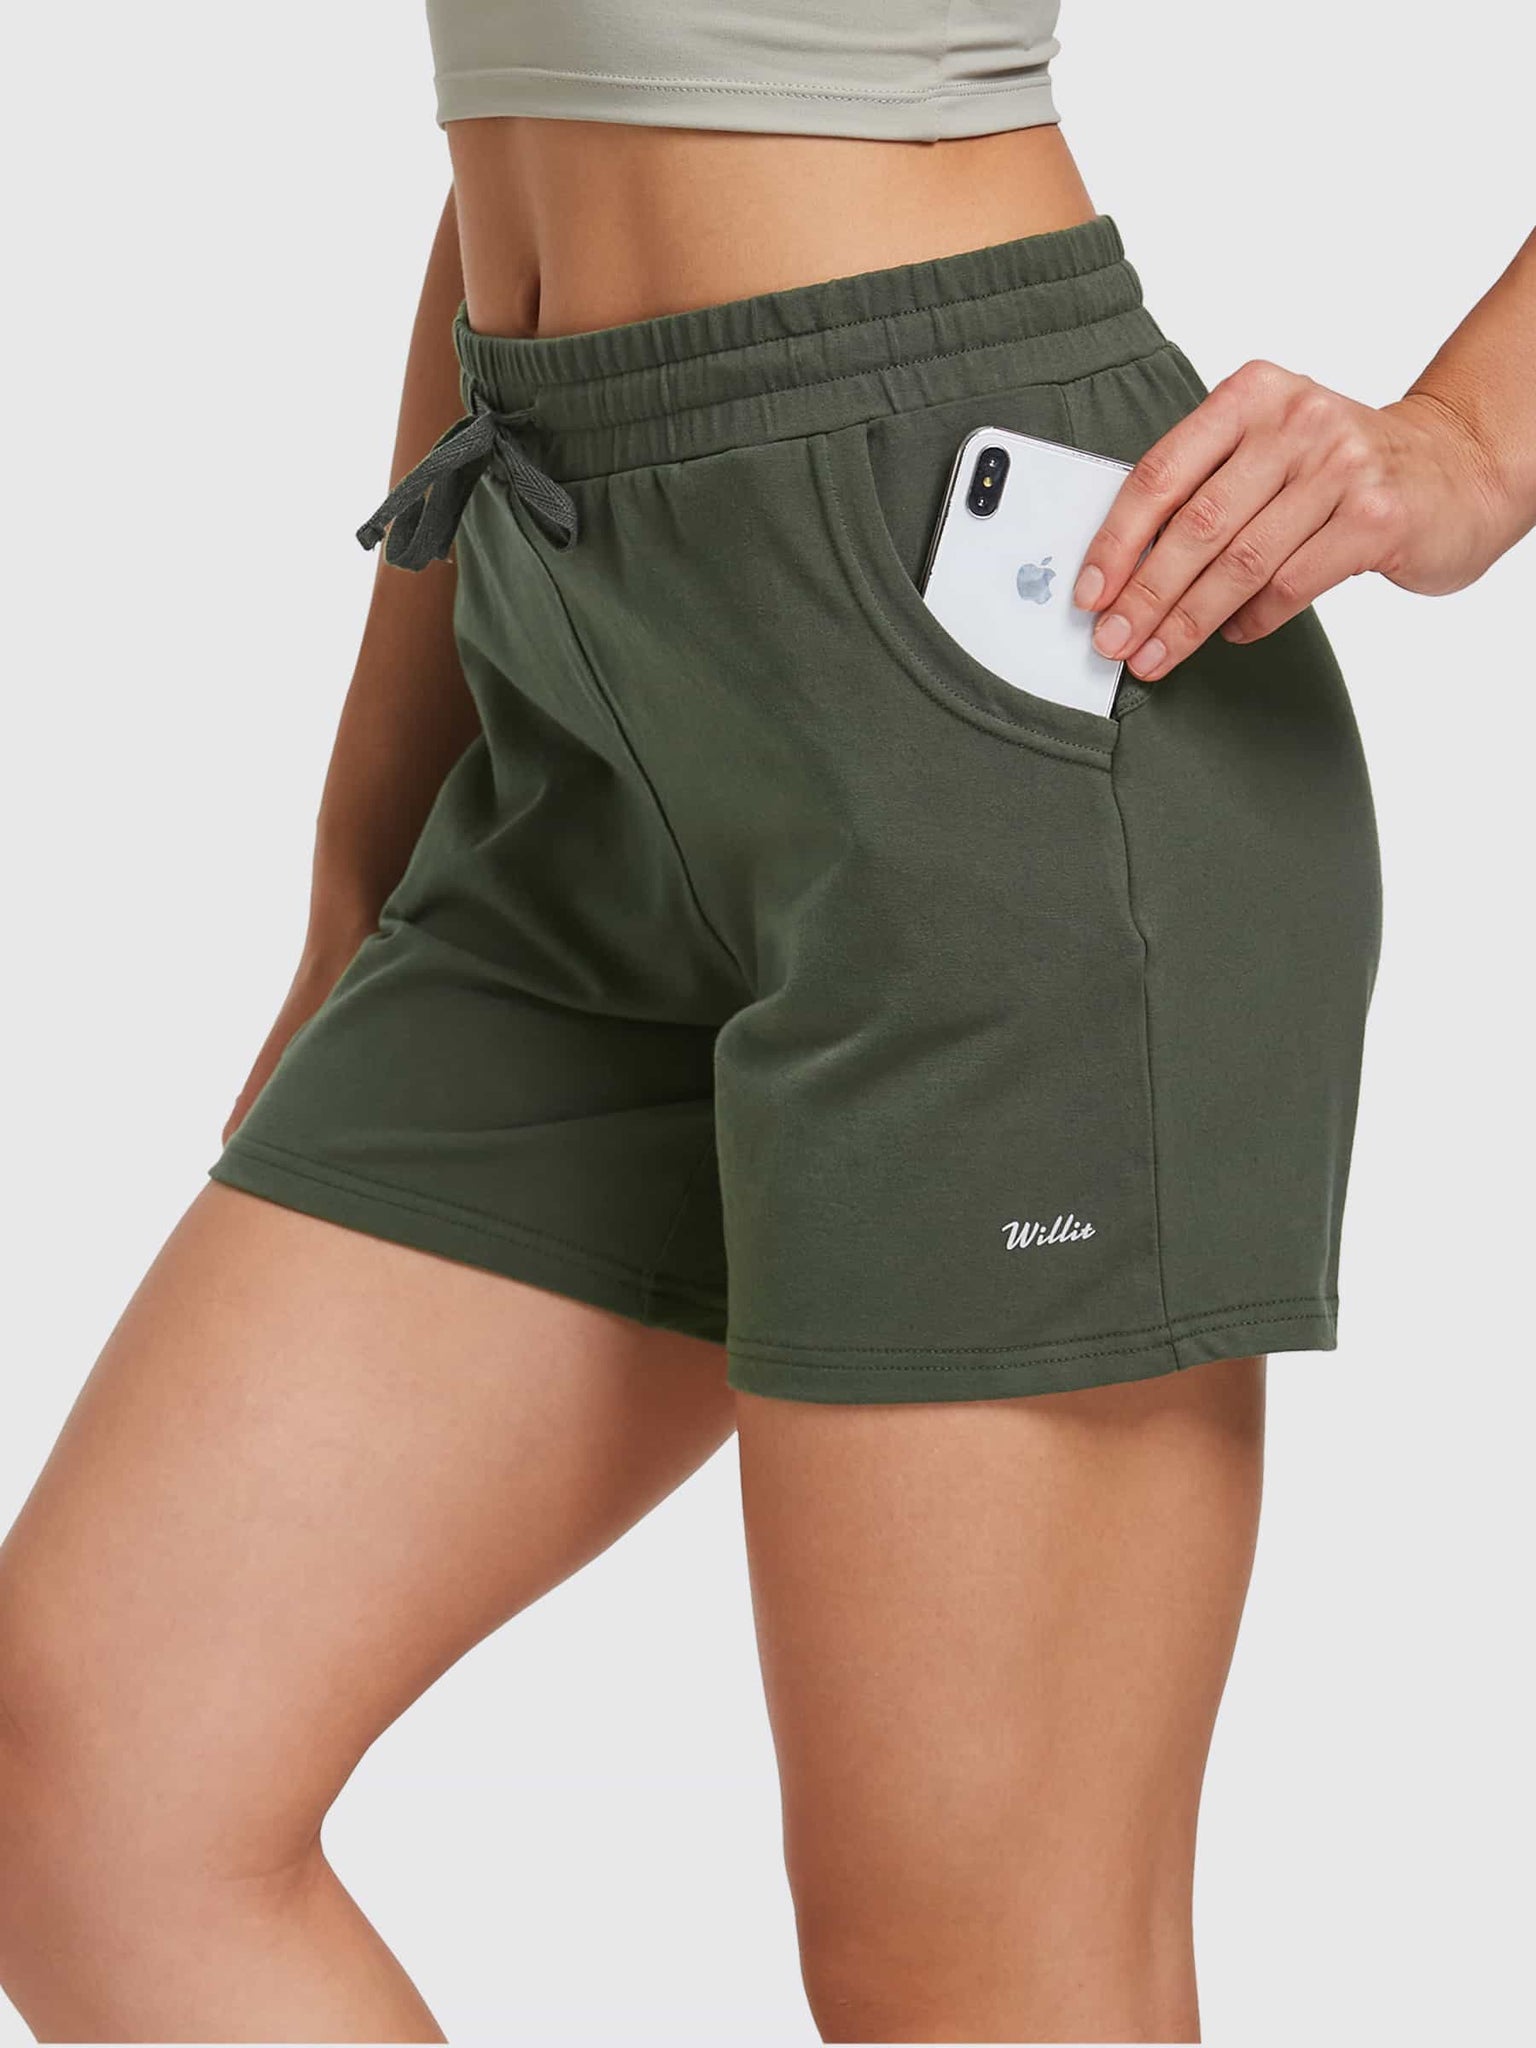 Women's Cotton Shorts with Pockets 5 Inch